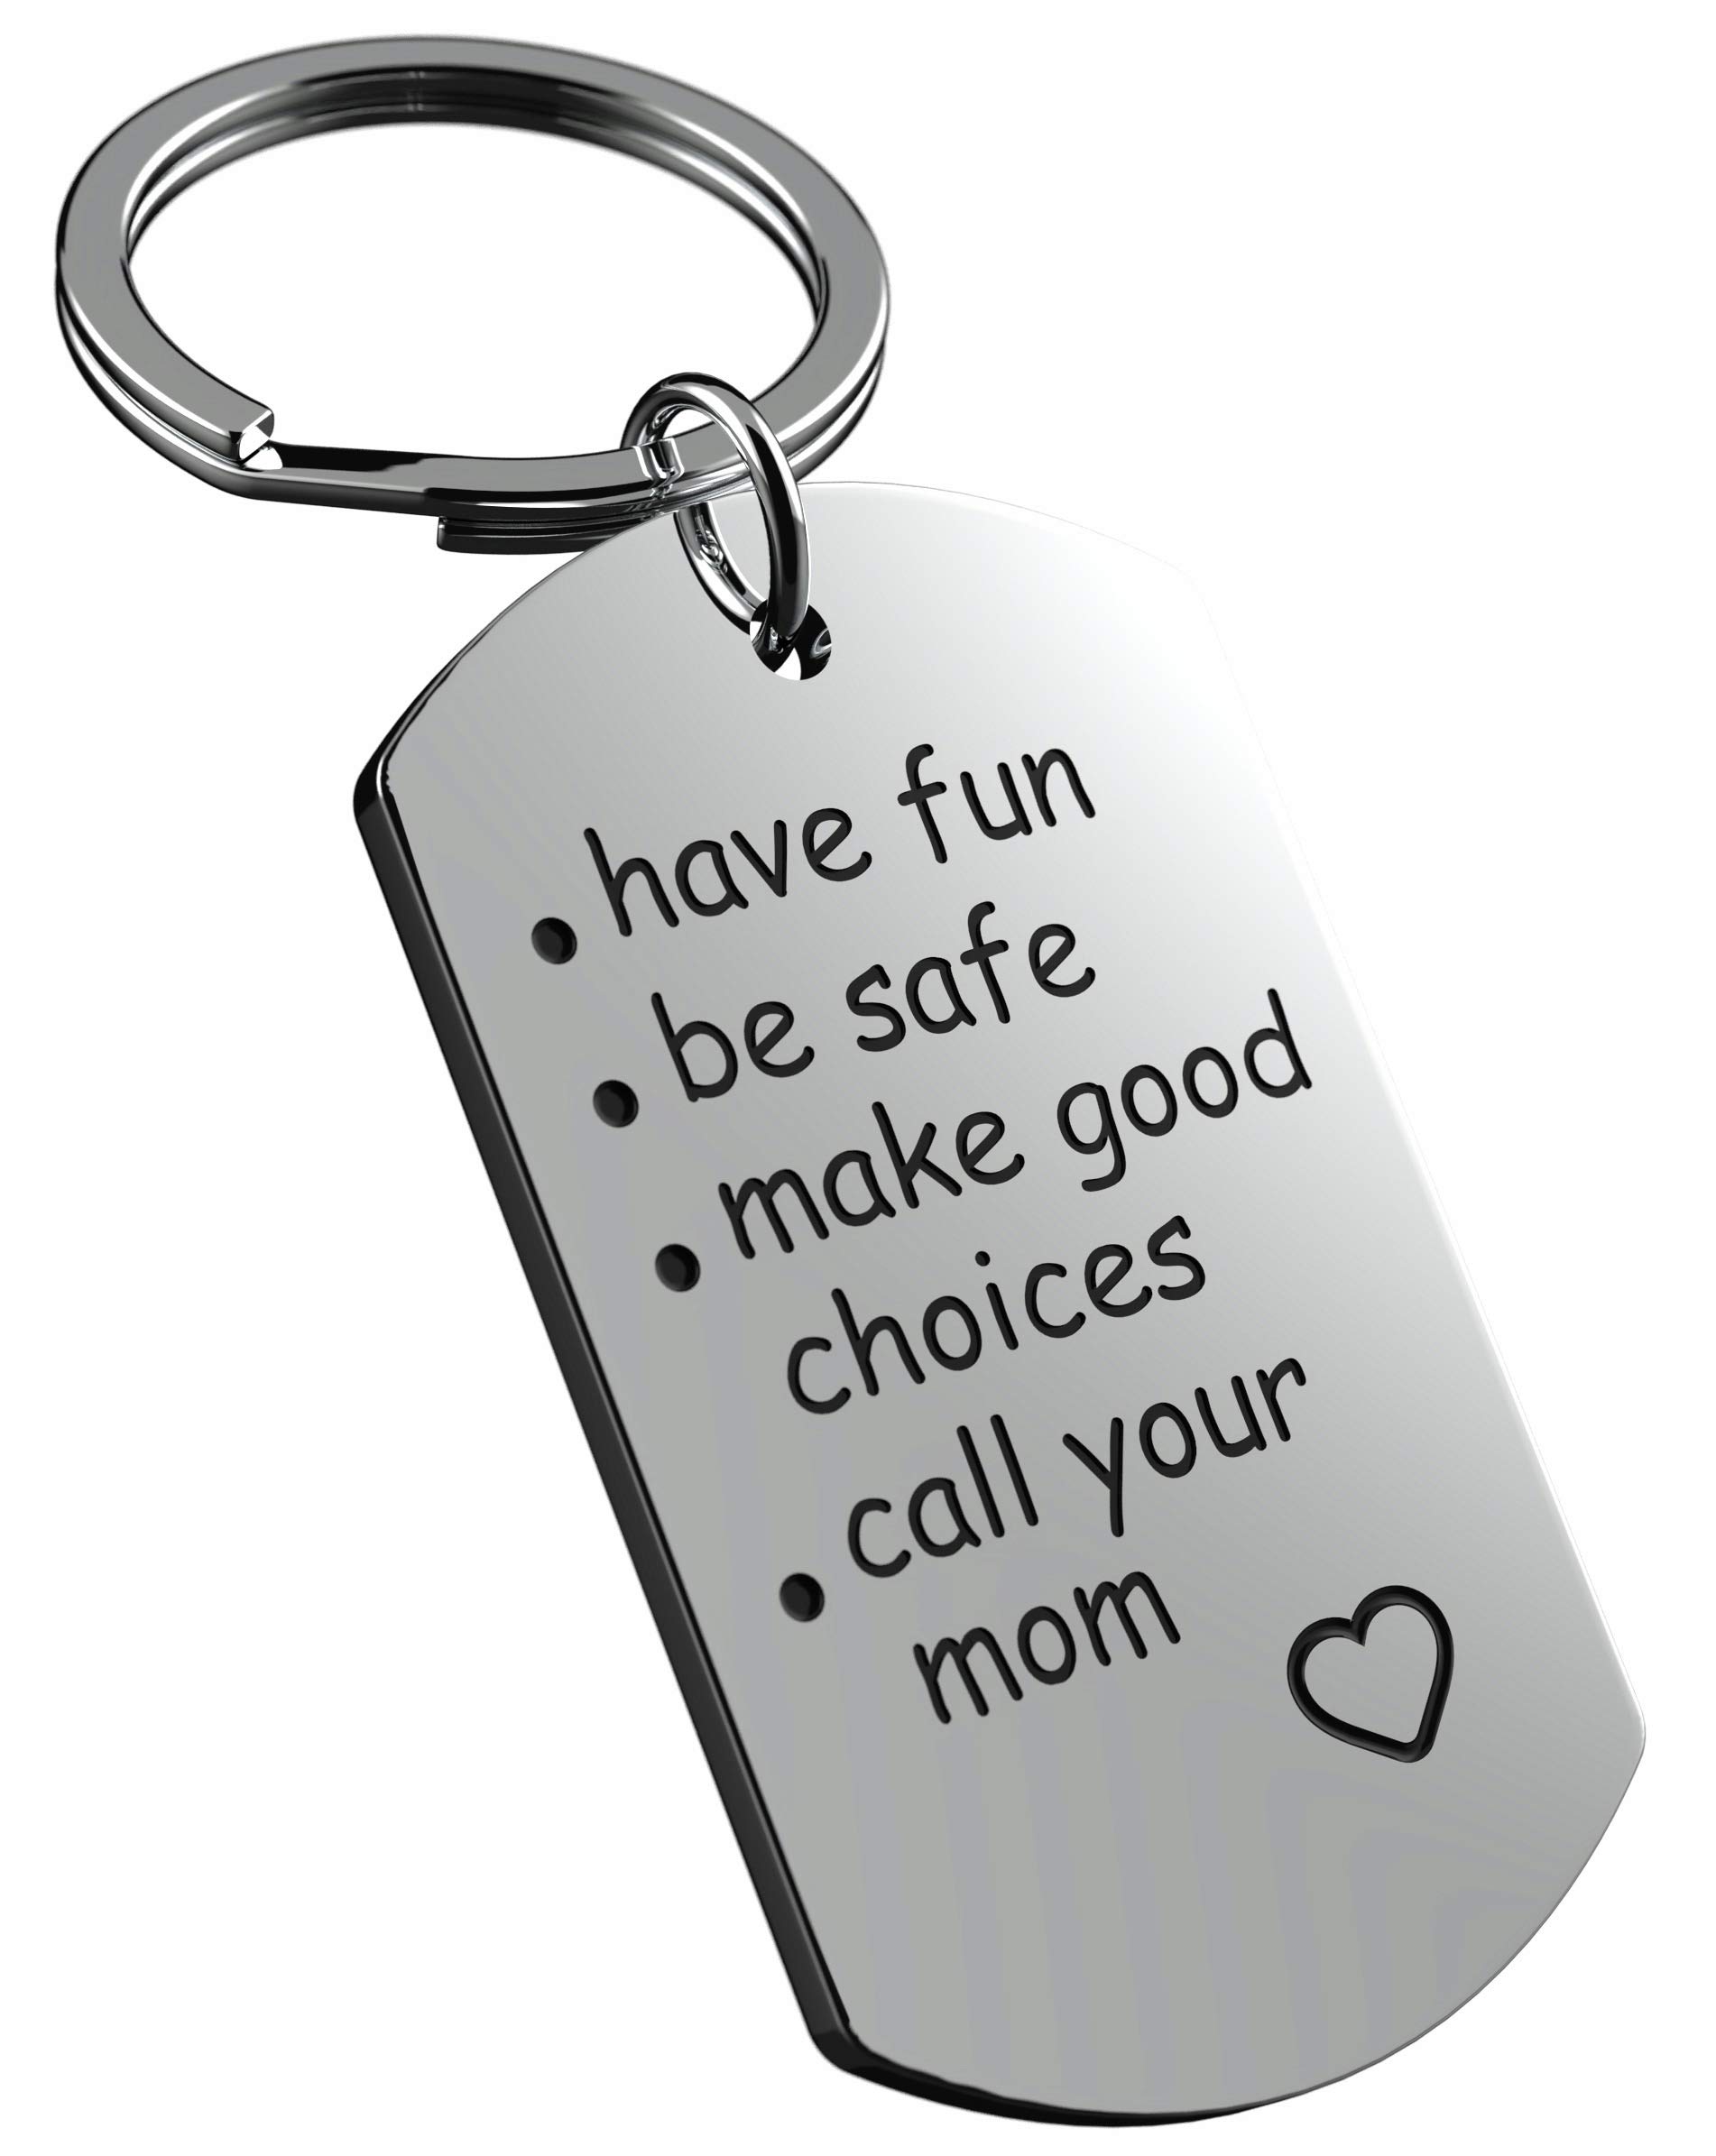 K9King Have Fun Be Safe Make Good Choices and Call your Mom Stainless Steel Keychain Gift for New Driver or Graduation Keychain